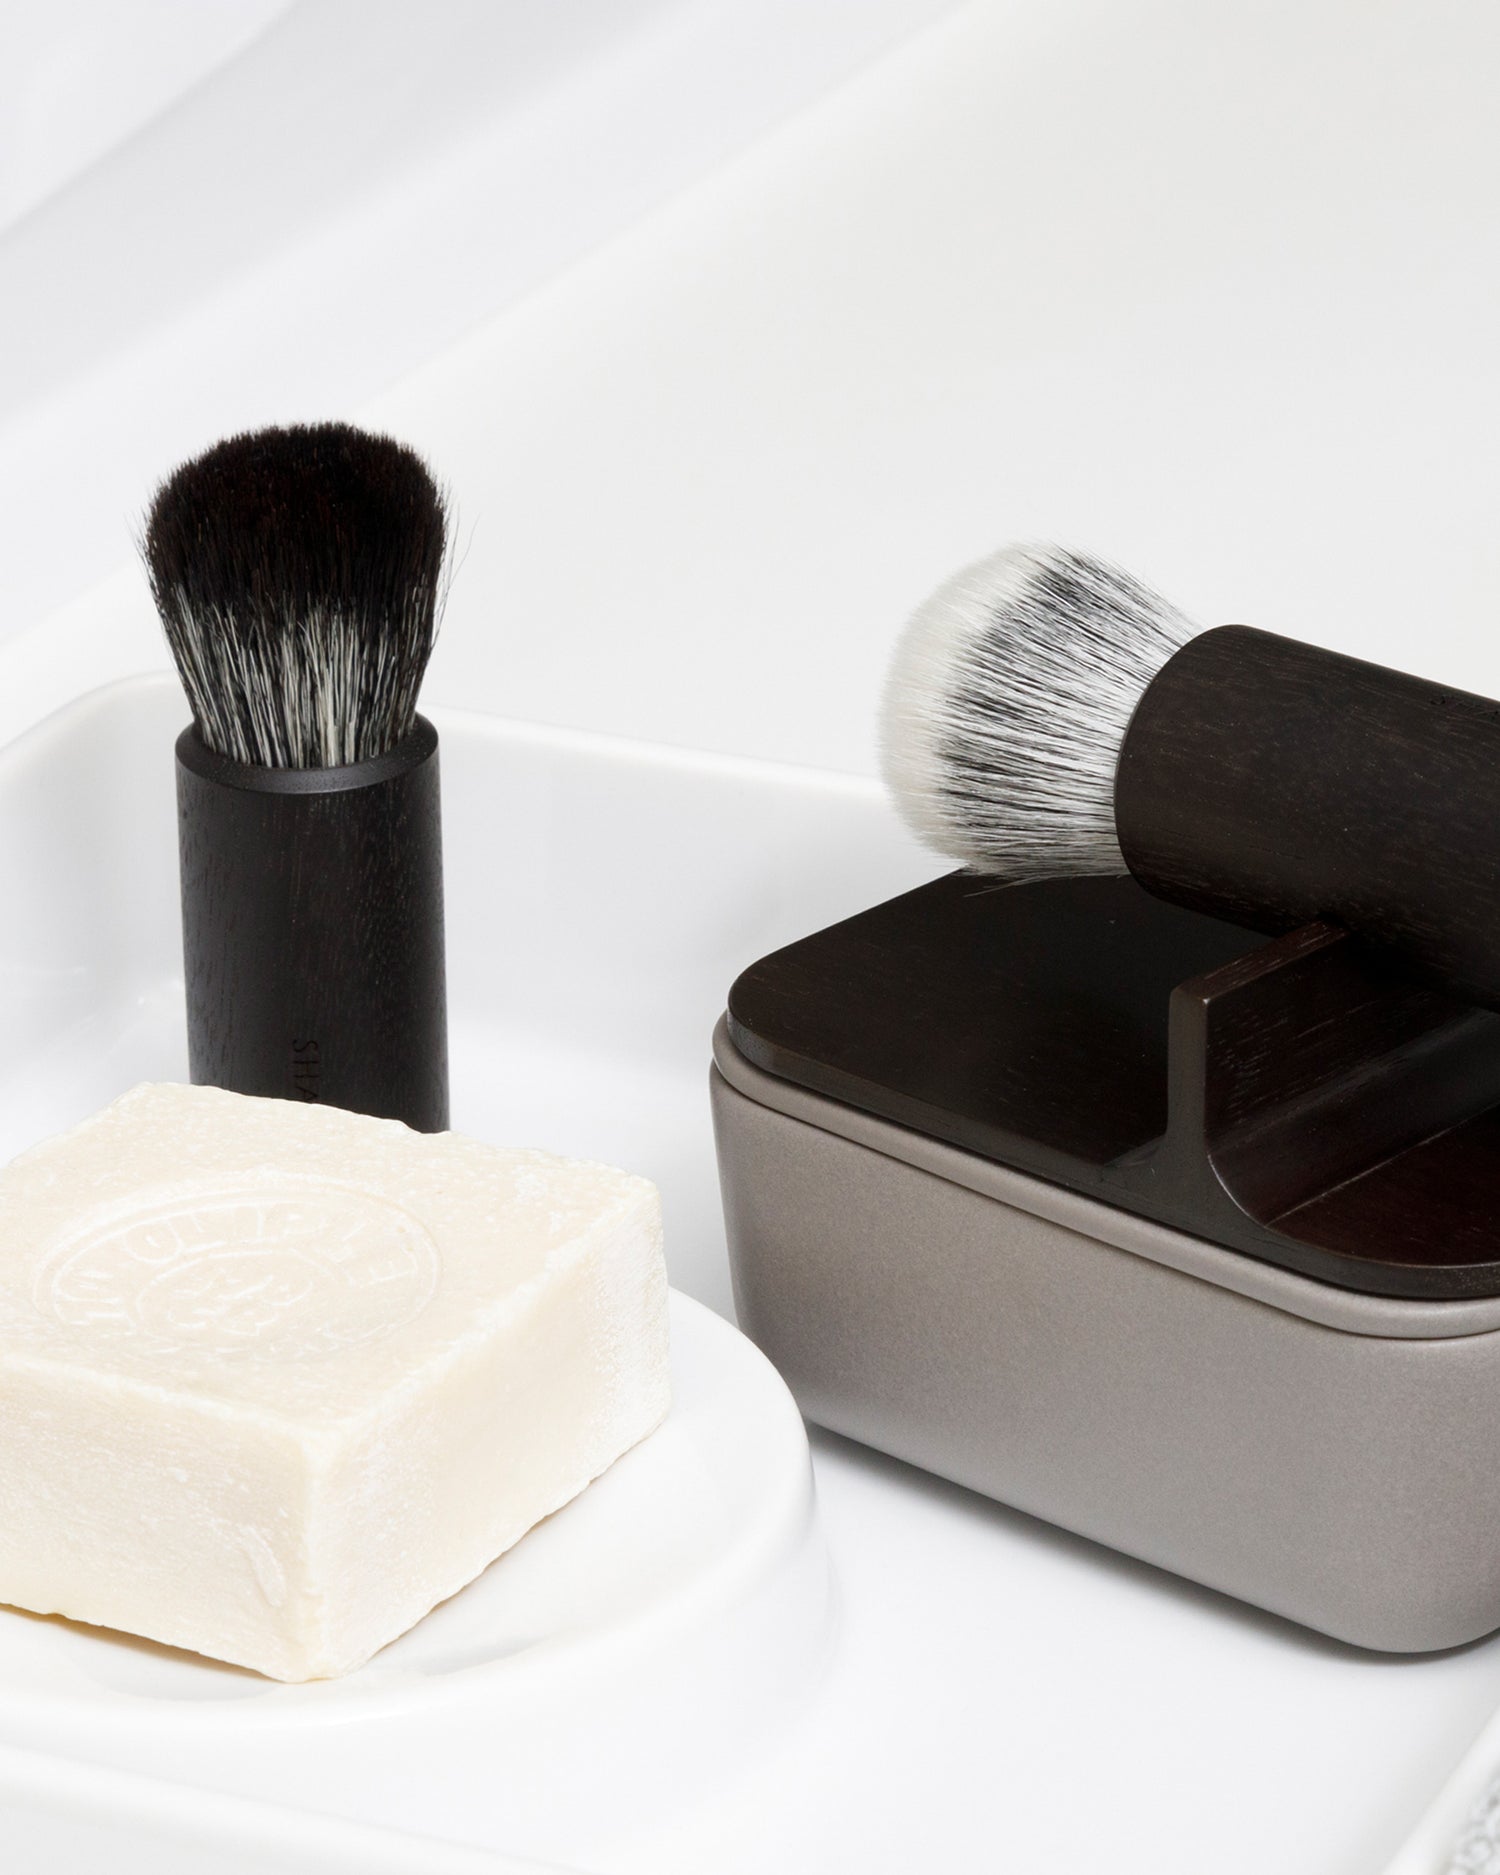 In situation image of hard Jiva face cleansing and shaving series next to bar of soap and additional shaving brush on ceramic tray.